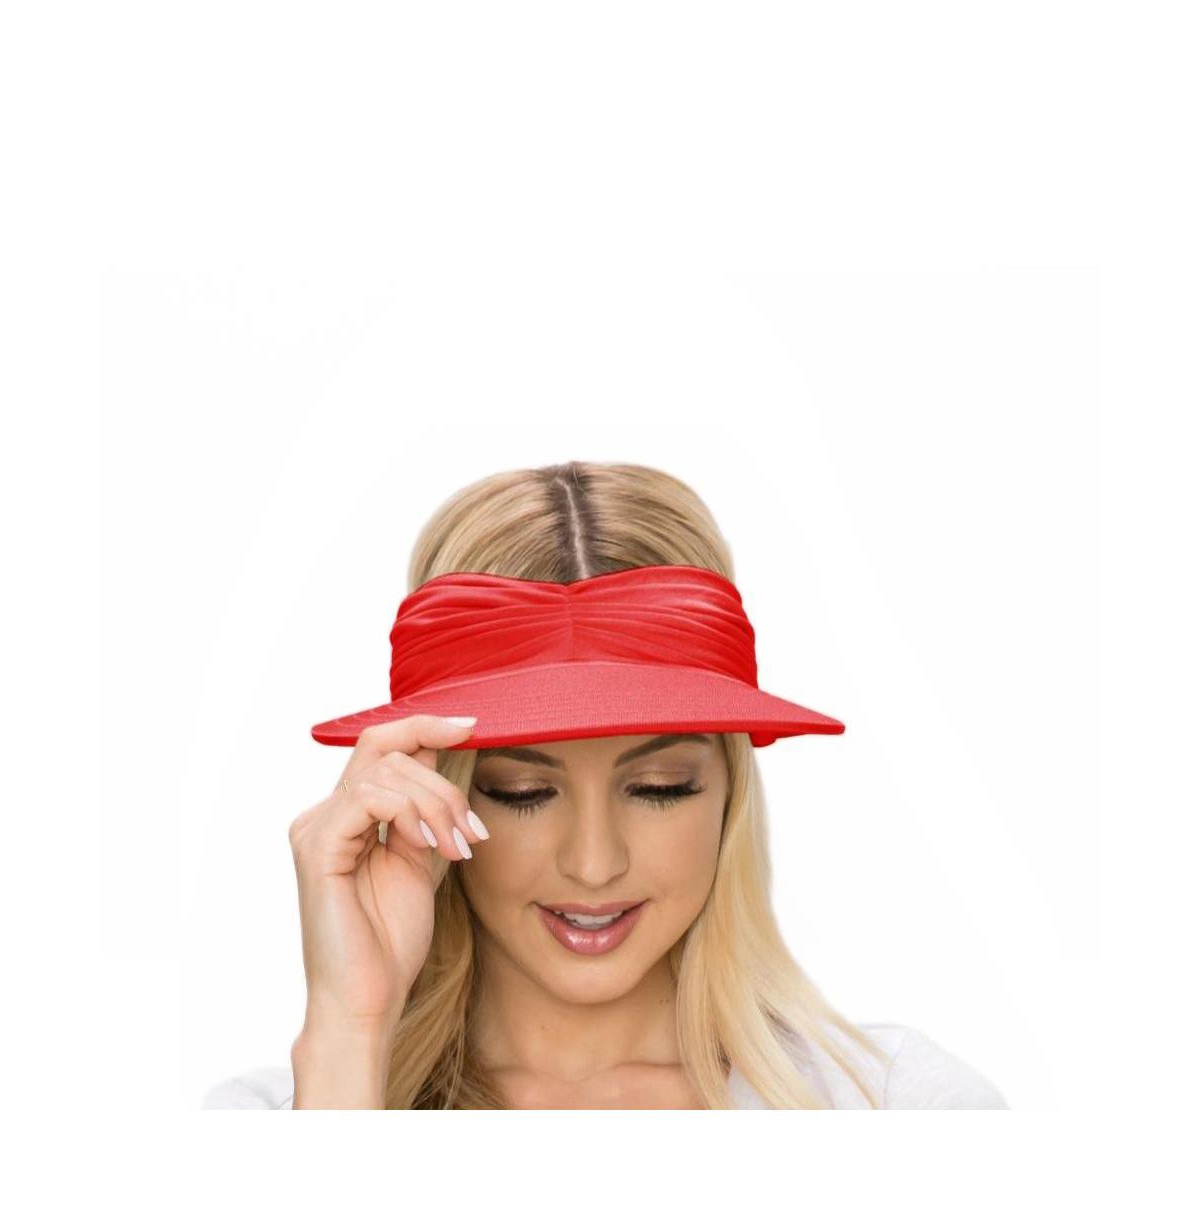 Women's Ruched Stretchy Headband Sun Visor Hat - Red